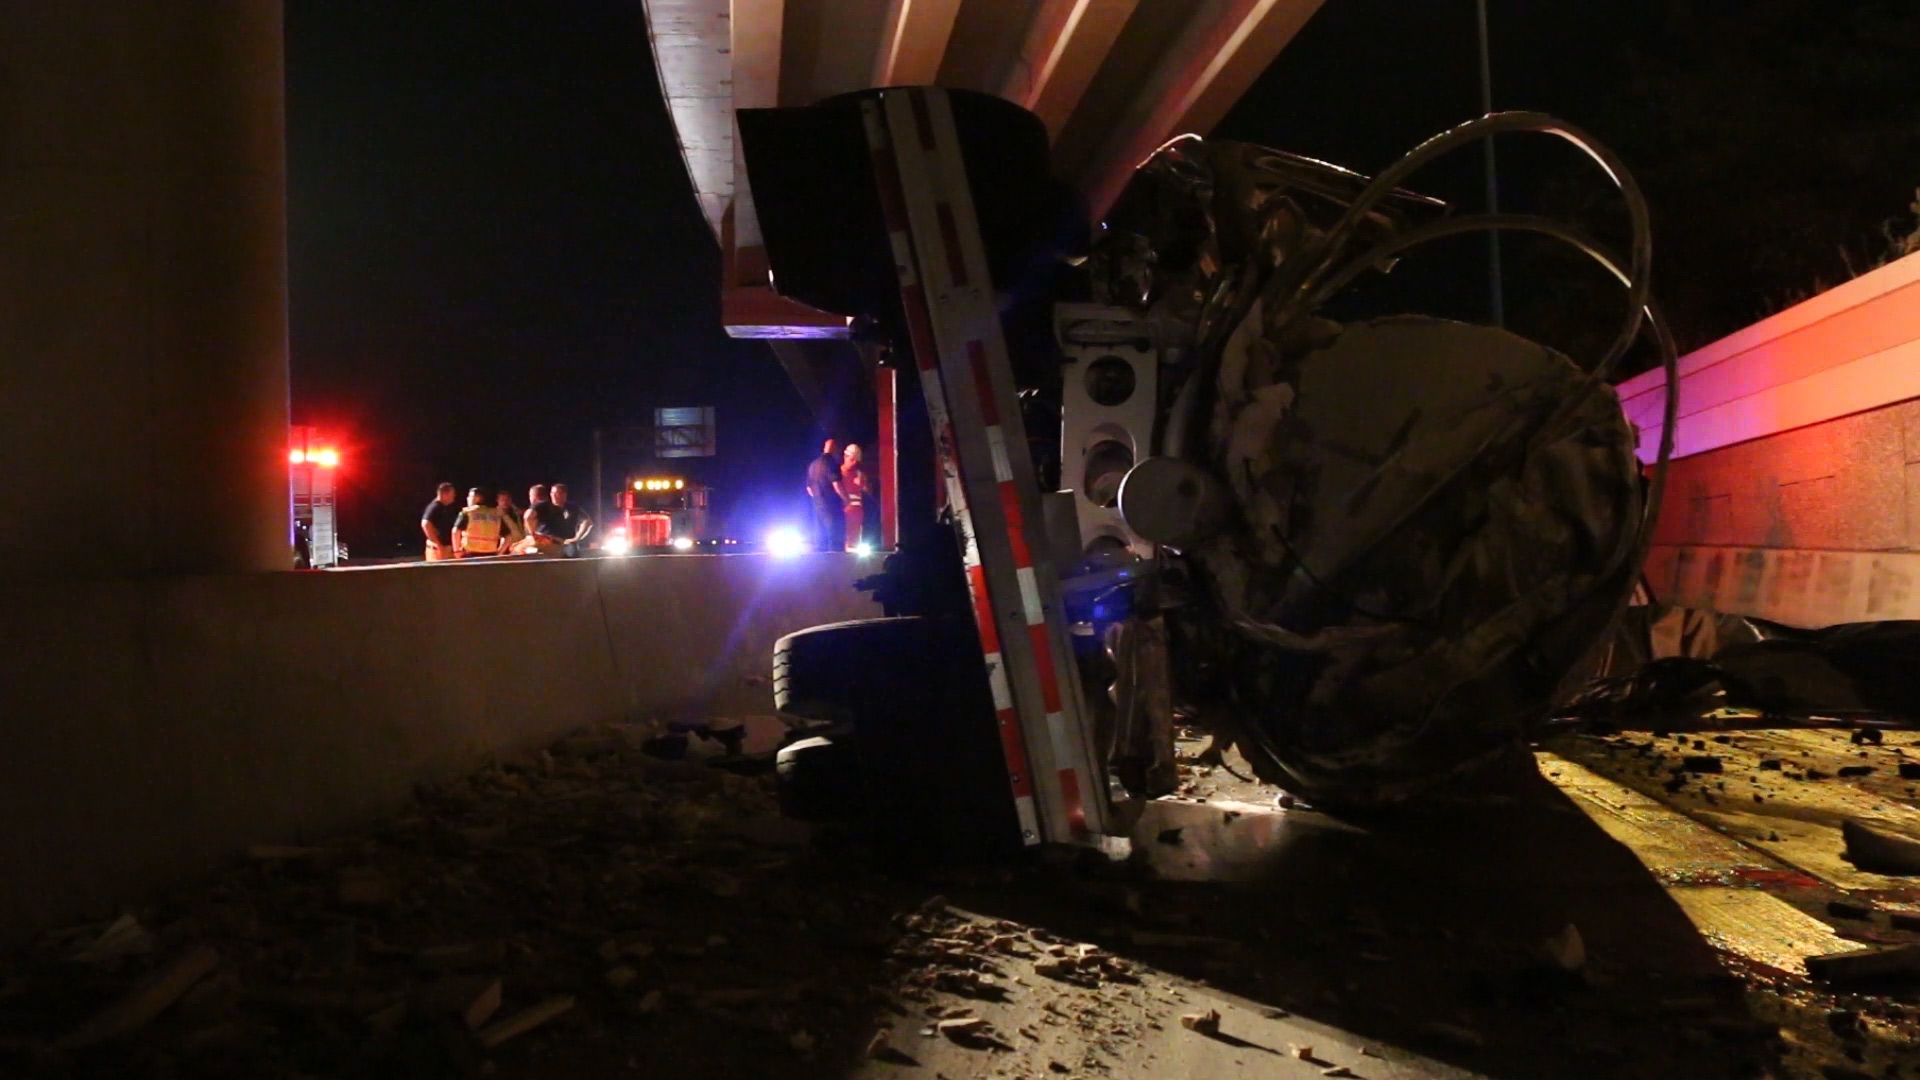 PHOTO: A tanker truck drove off a 40-foot overpass in Lufkin, Texas, breaking into two pieces with the cab landing the southbound lane where police officers managed to rescue the driver while the other half burned nearby.